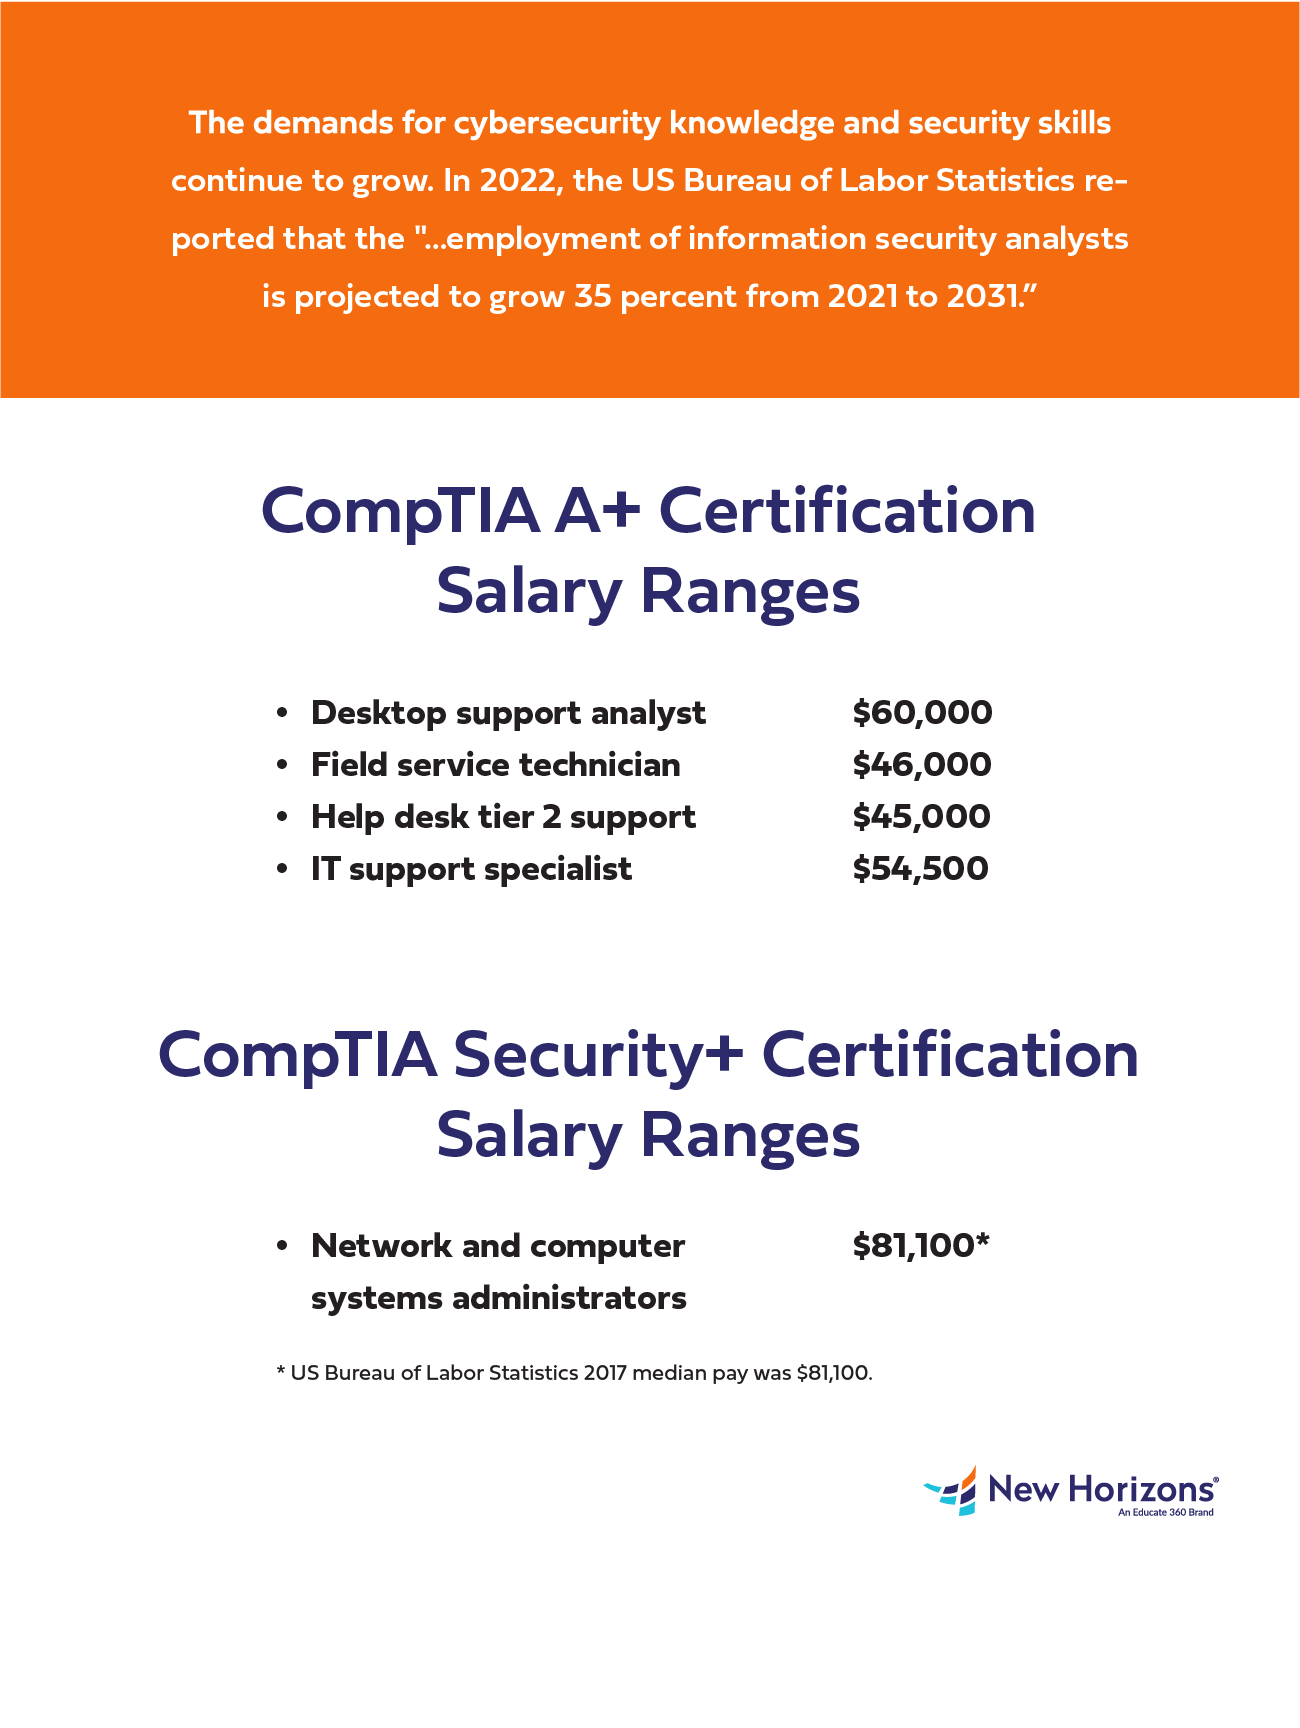 CompTIA A+ vs Security+: Salary Ranges